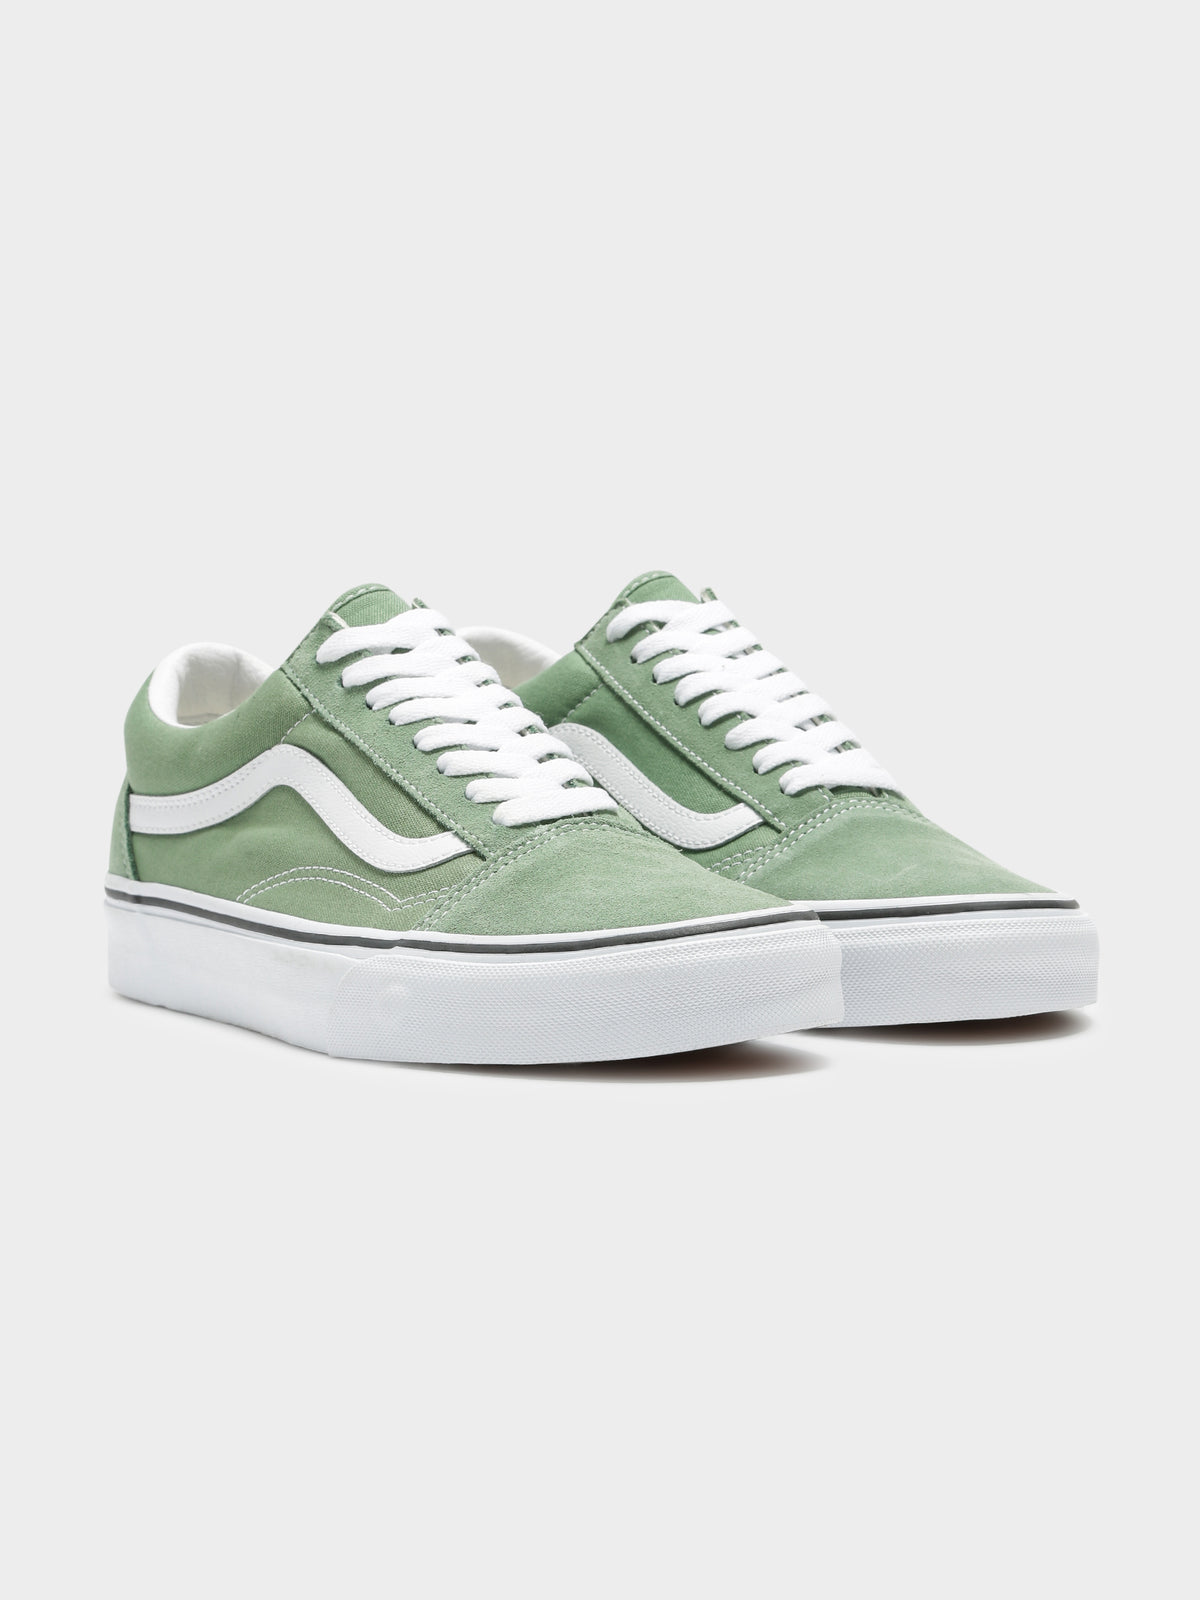 Unisex Old Skool Sneakers in Shale Green &amp; White